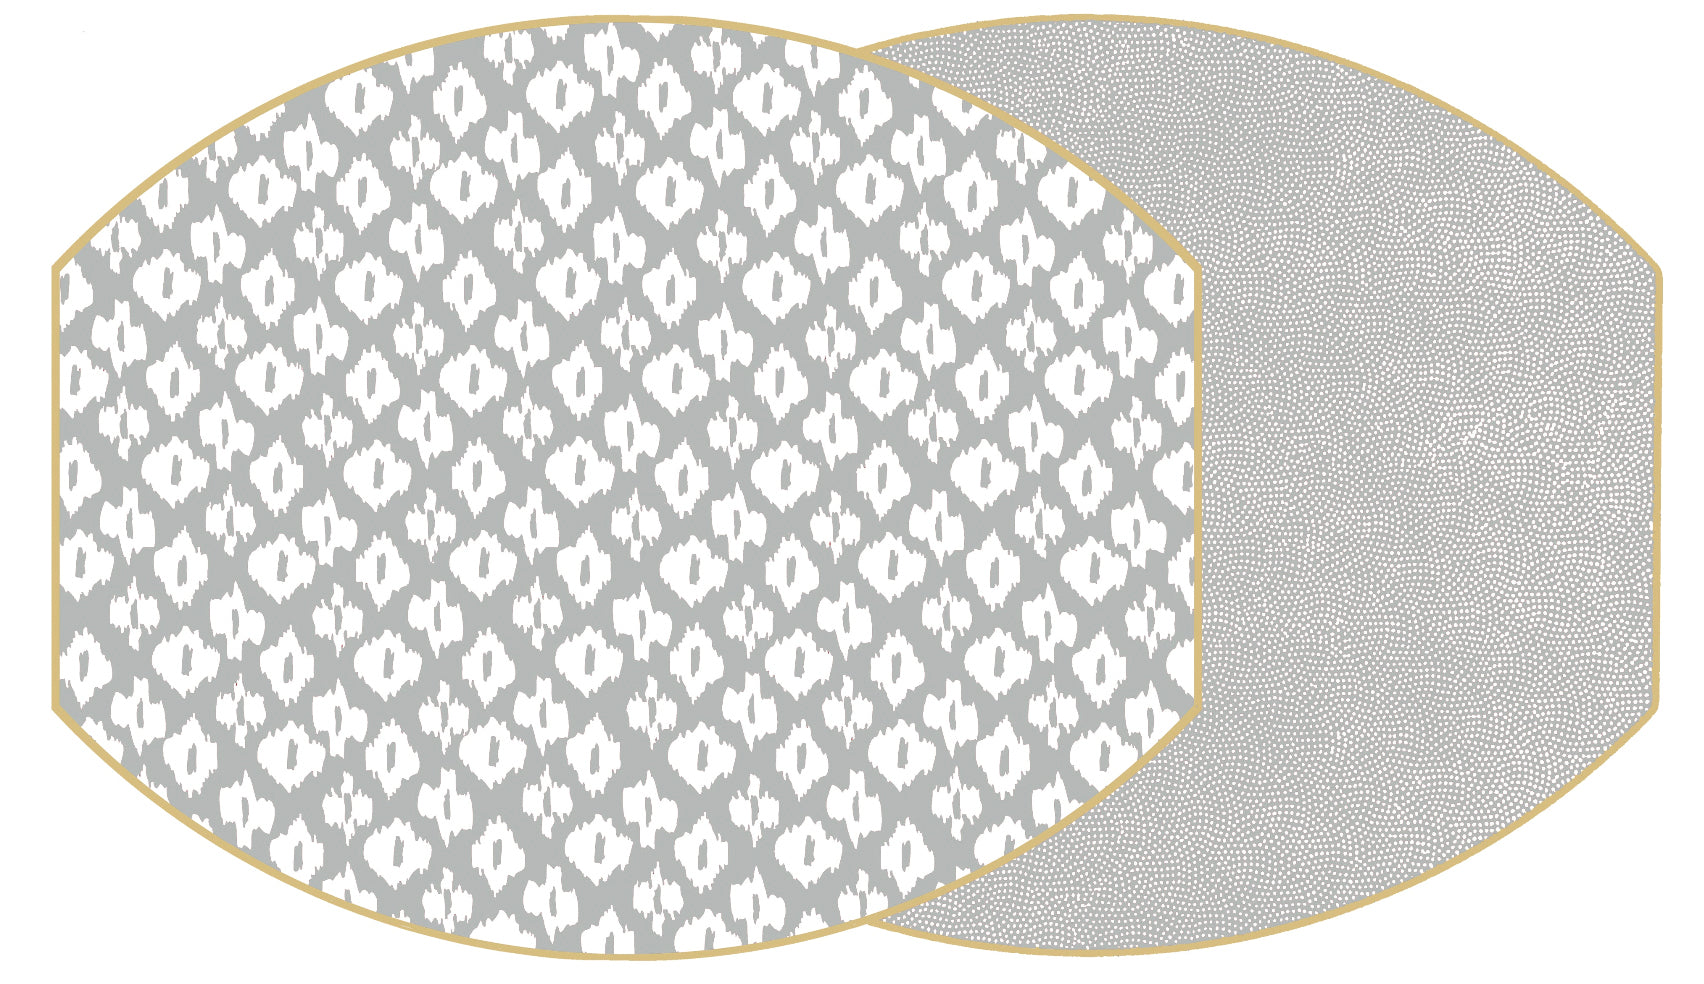 ELLIPSE TWO SIDED IKAT AND DOT FAN PLACEMAT ~ GRAY